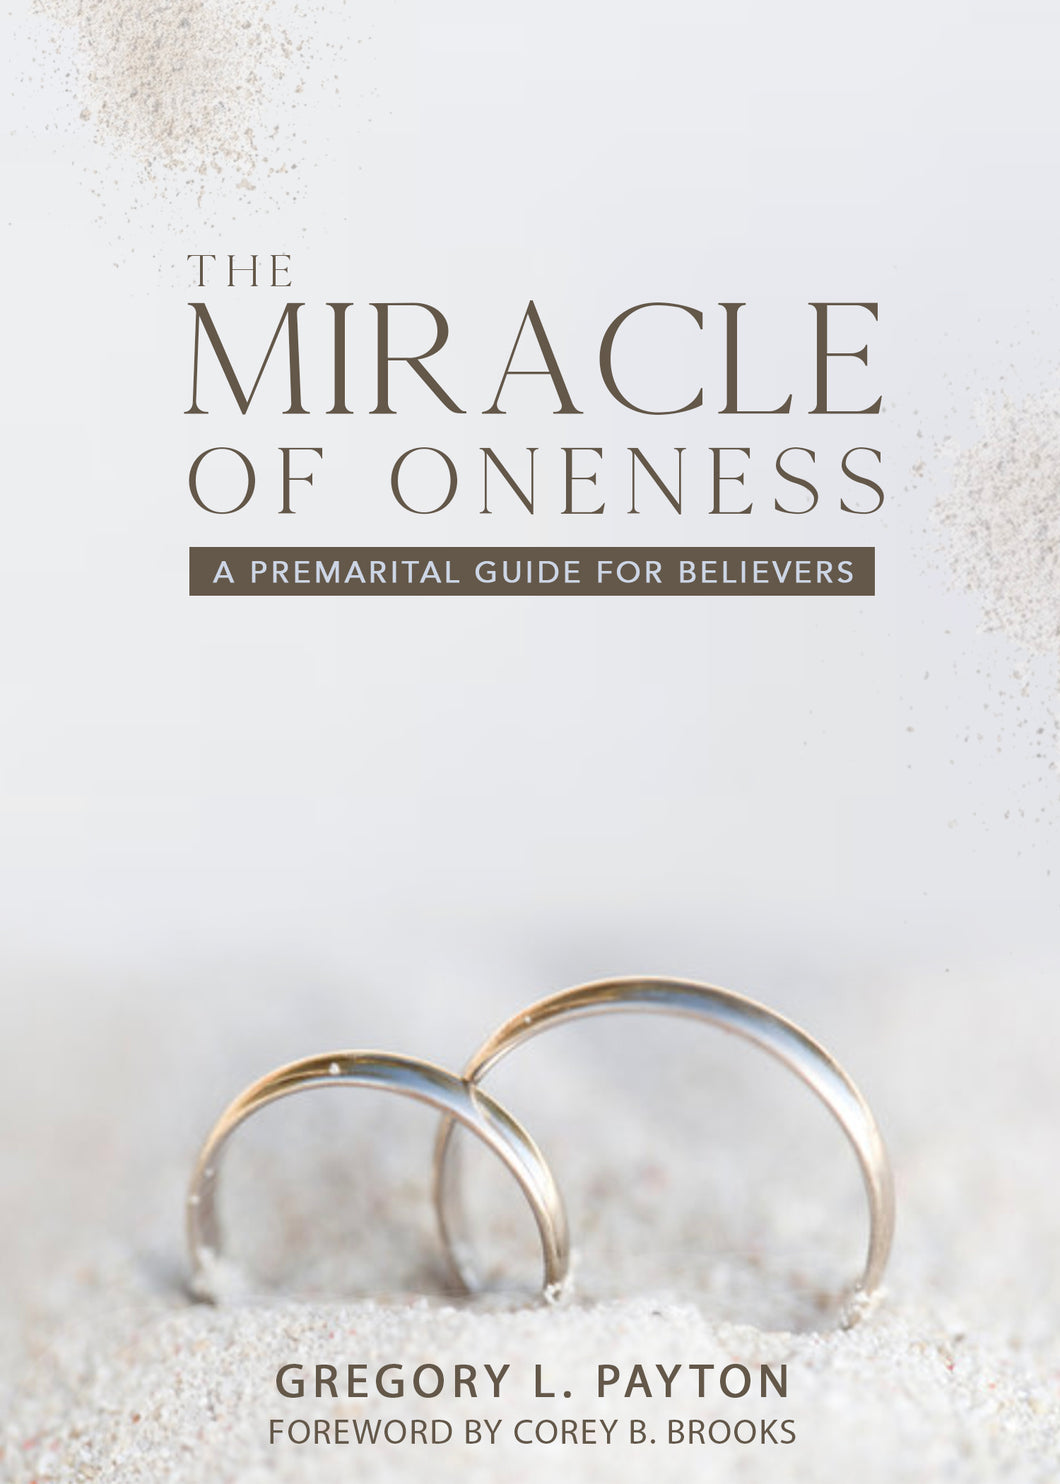 The Miracle of Oneness- Gregory L. Payton